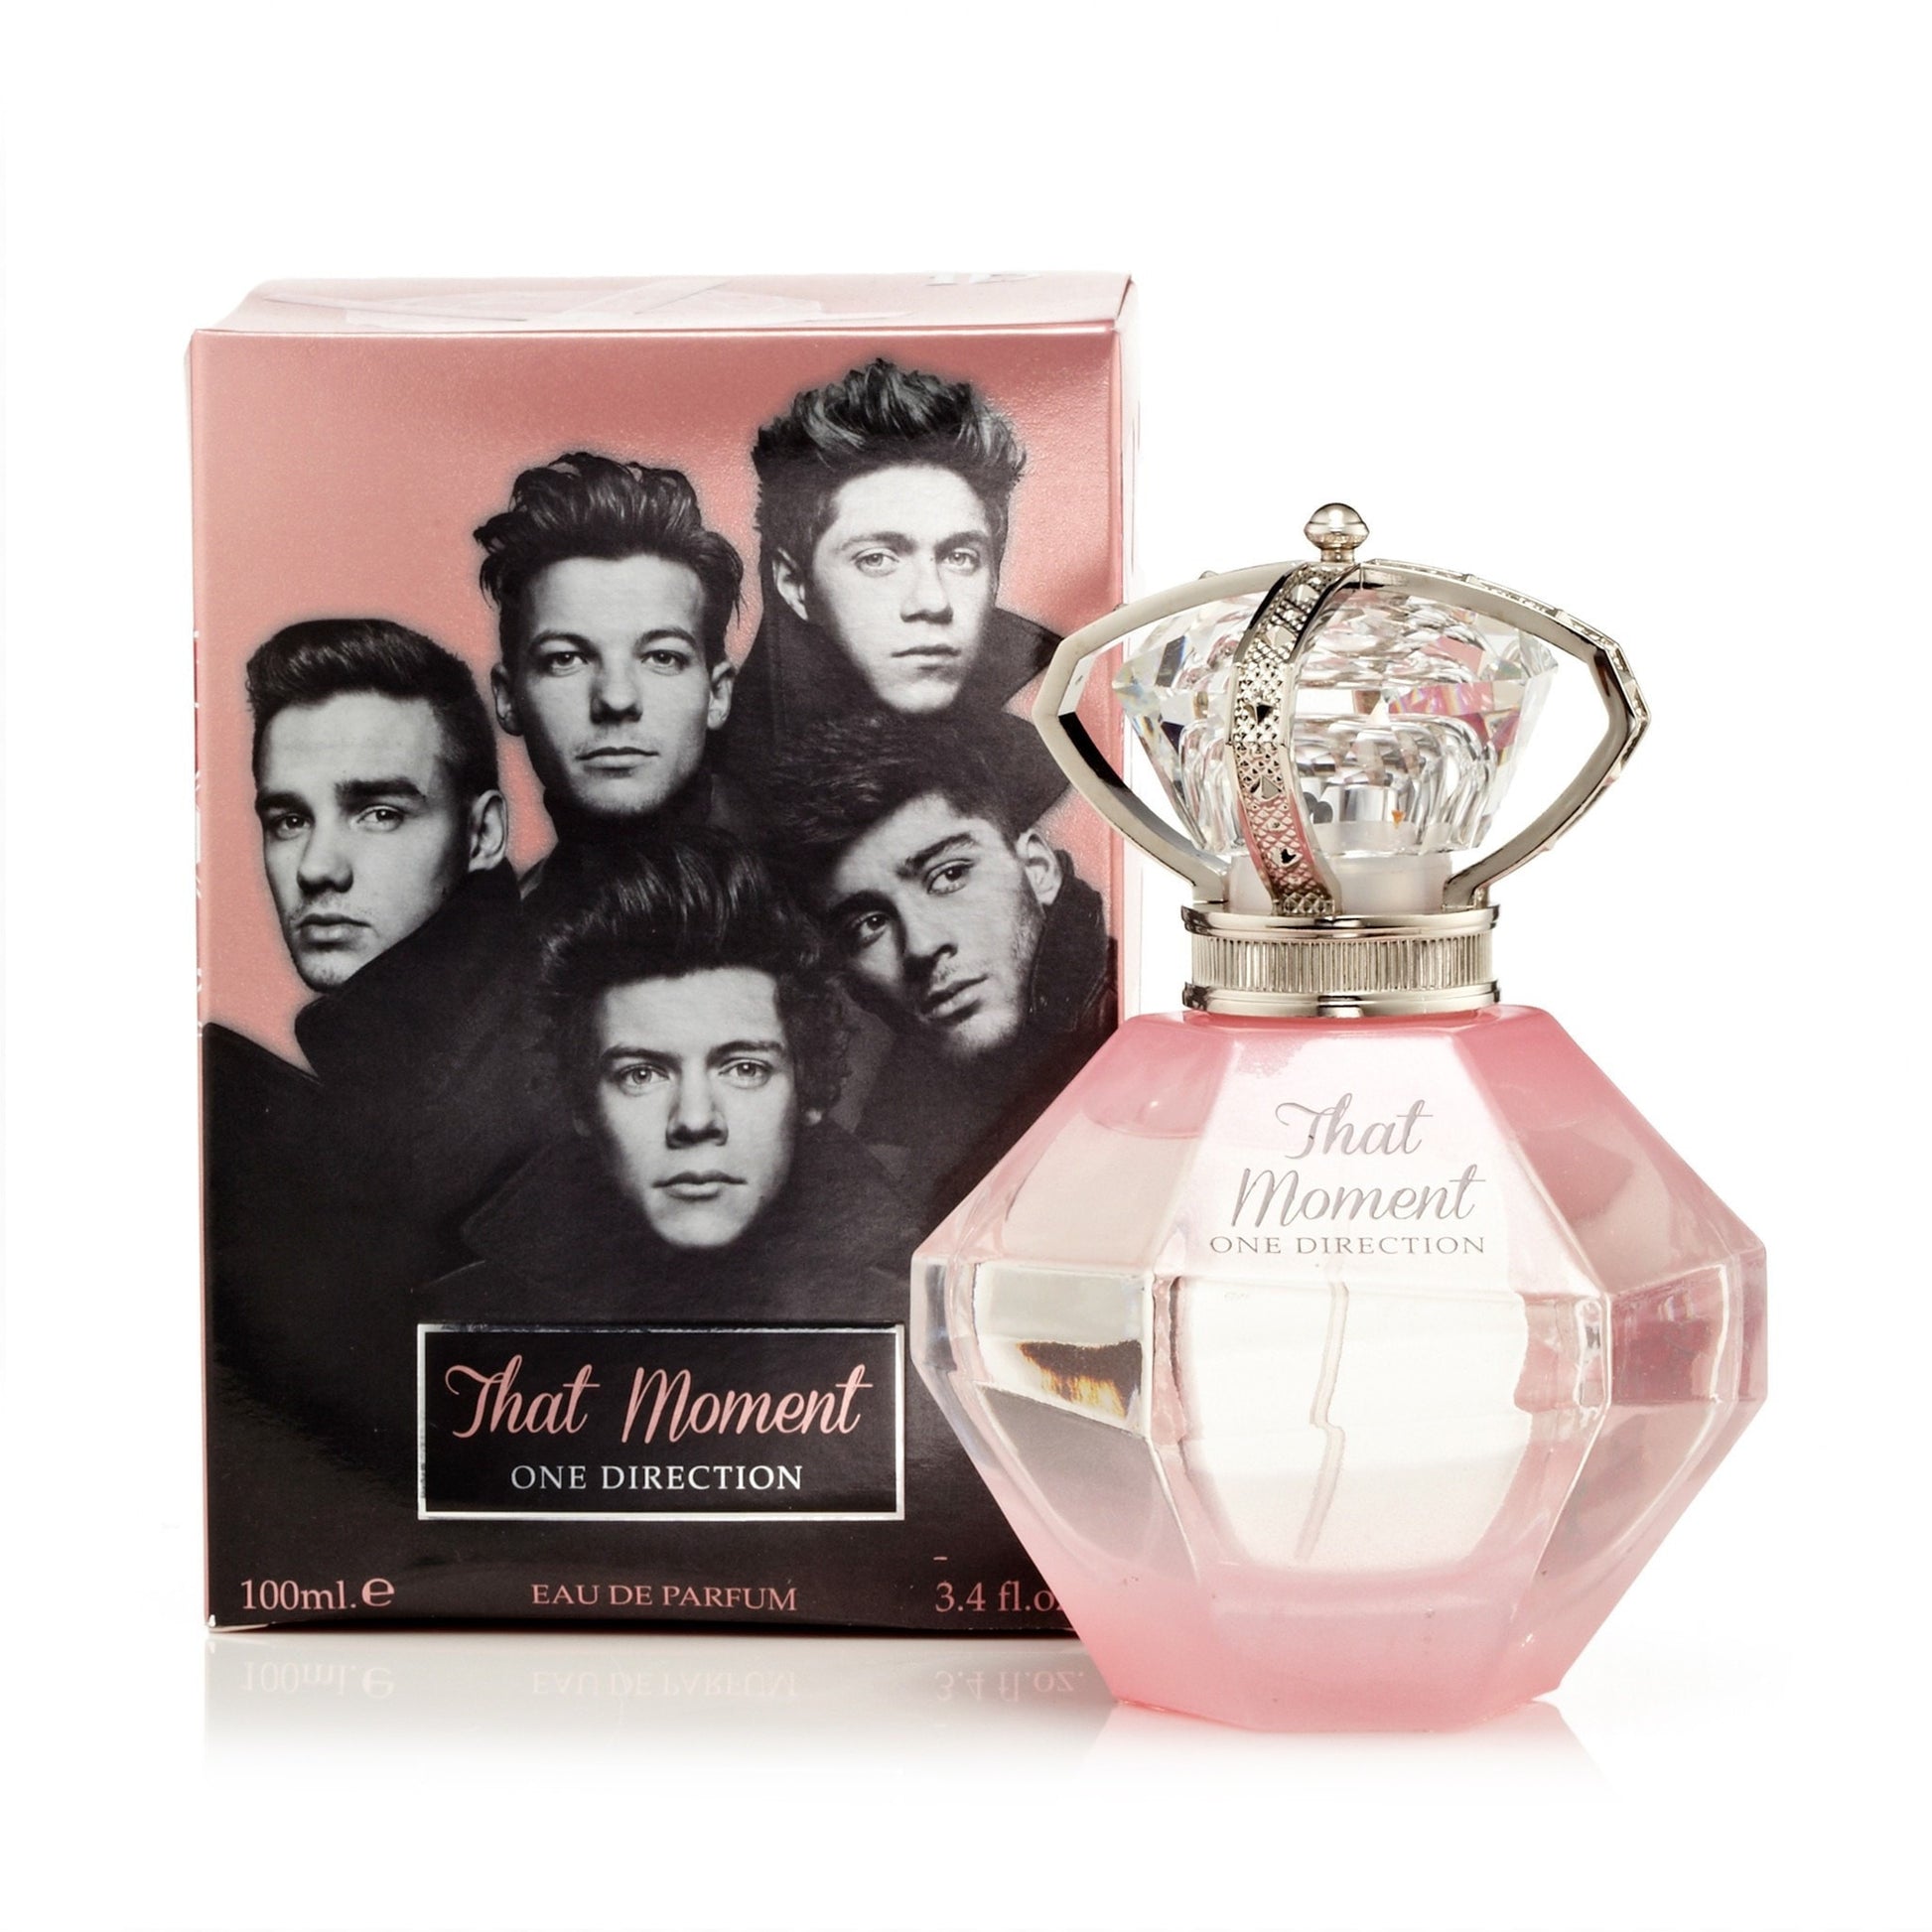 One Direction That Moment Eau de Parfum Womens Spray 3.4 oz.  Click to open in modal